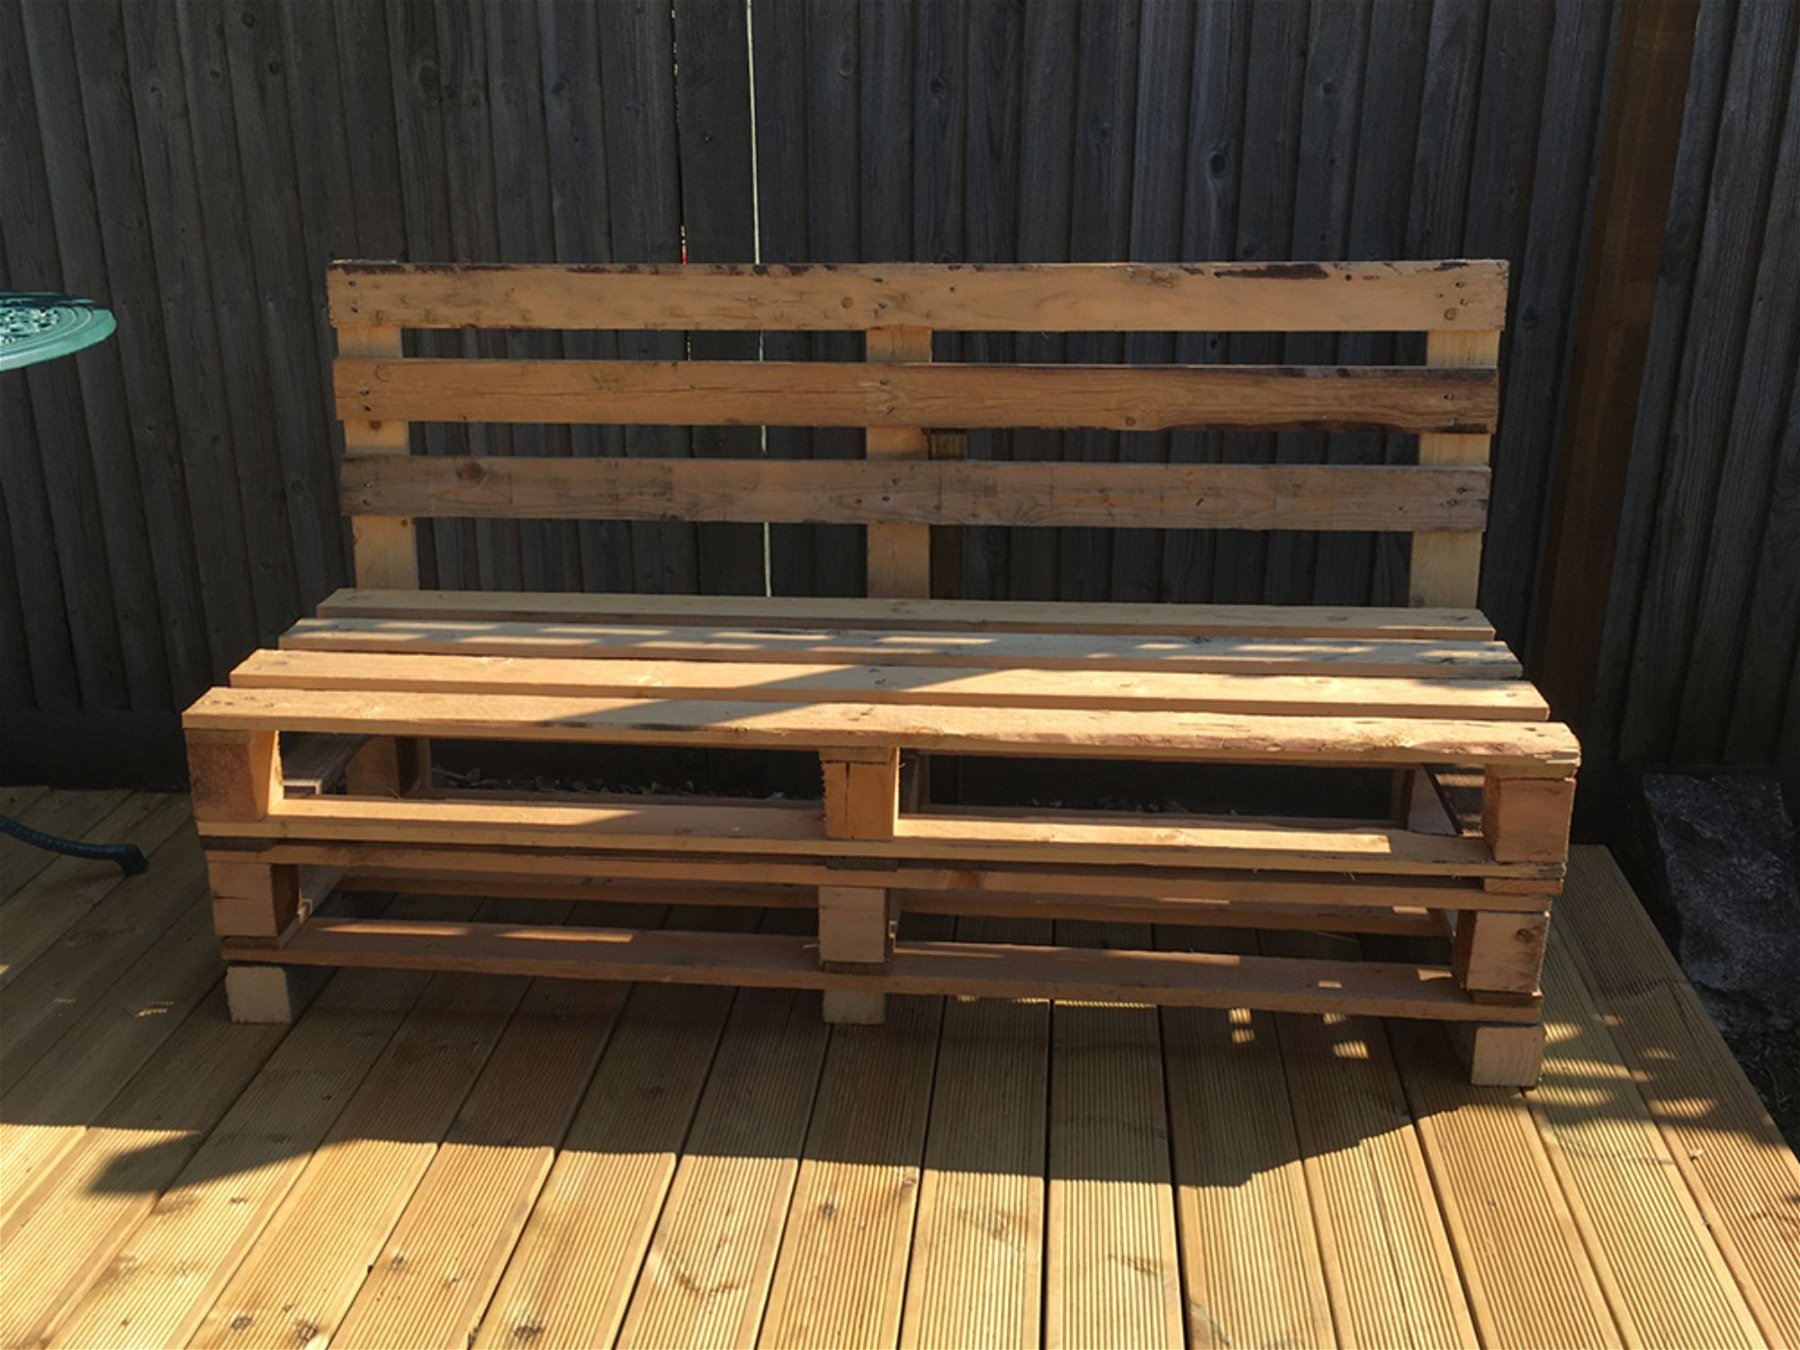 One of the finished benches